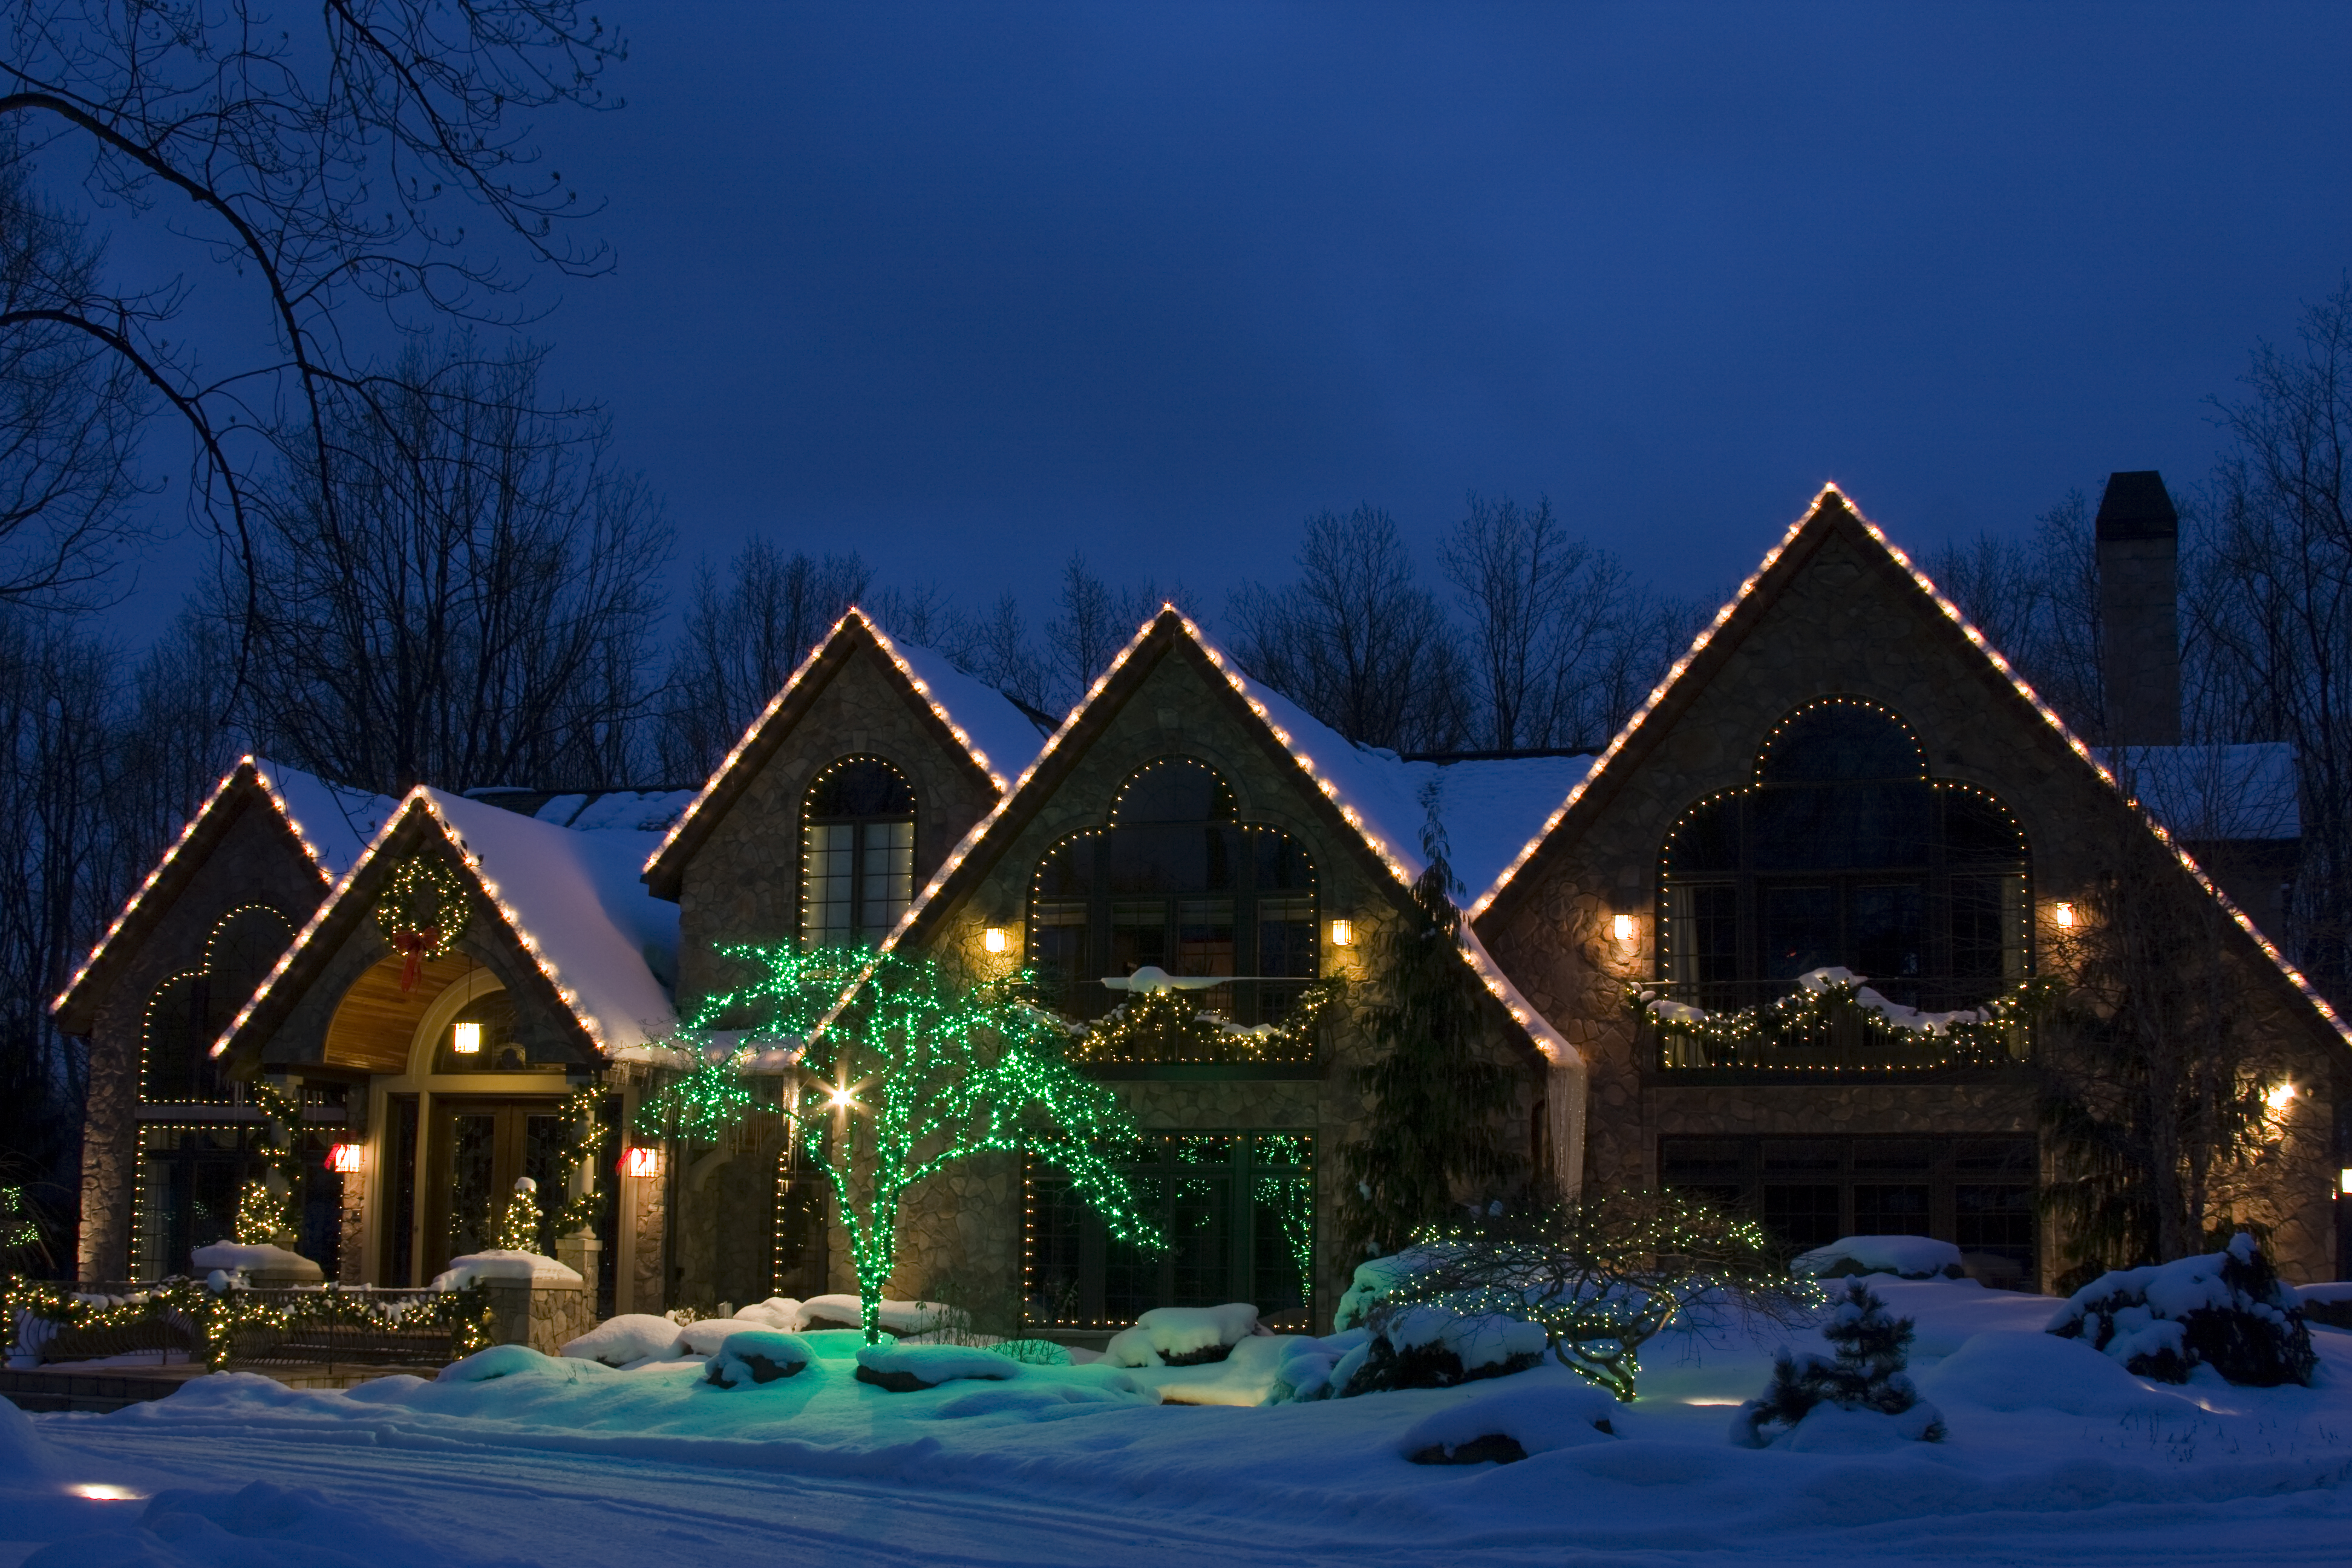 Residential Christmas Decor Nighttime View